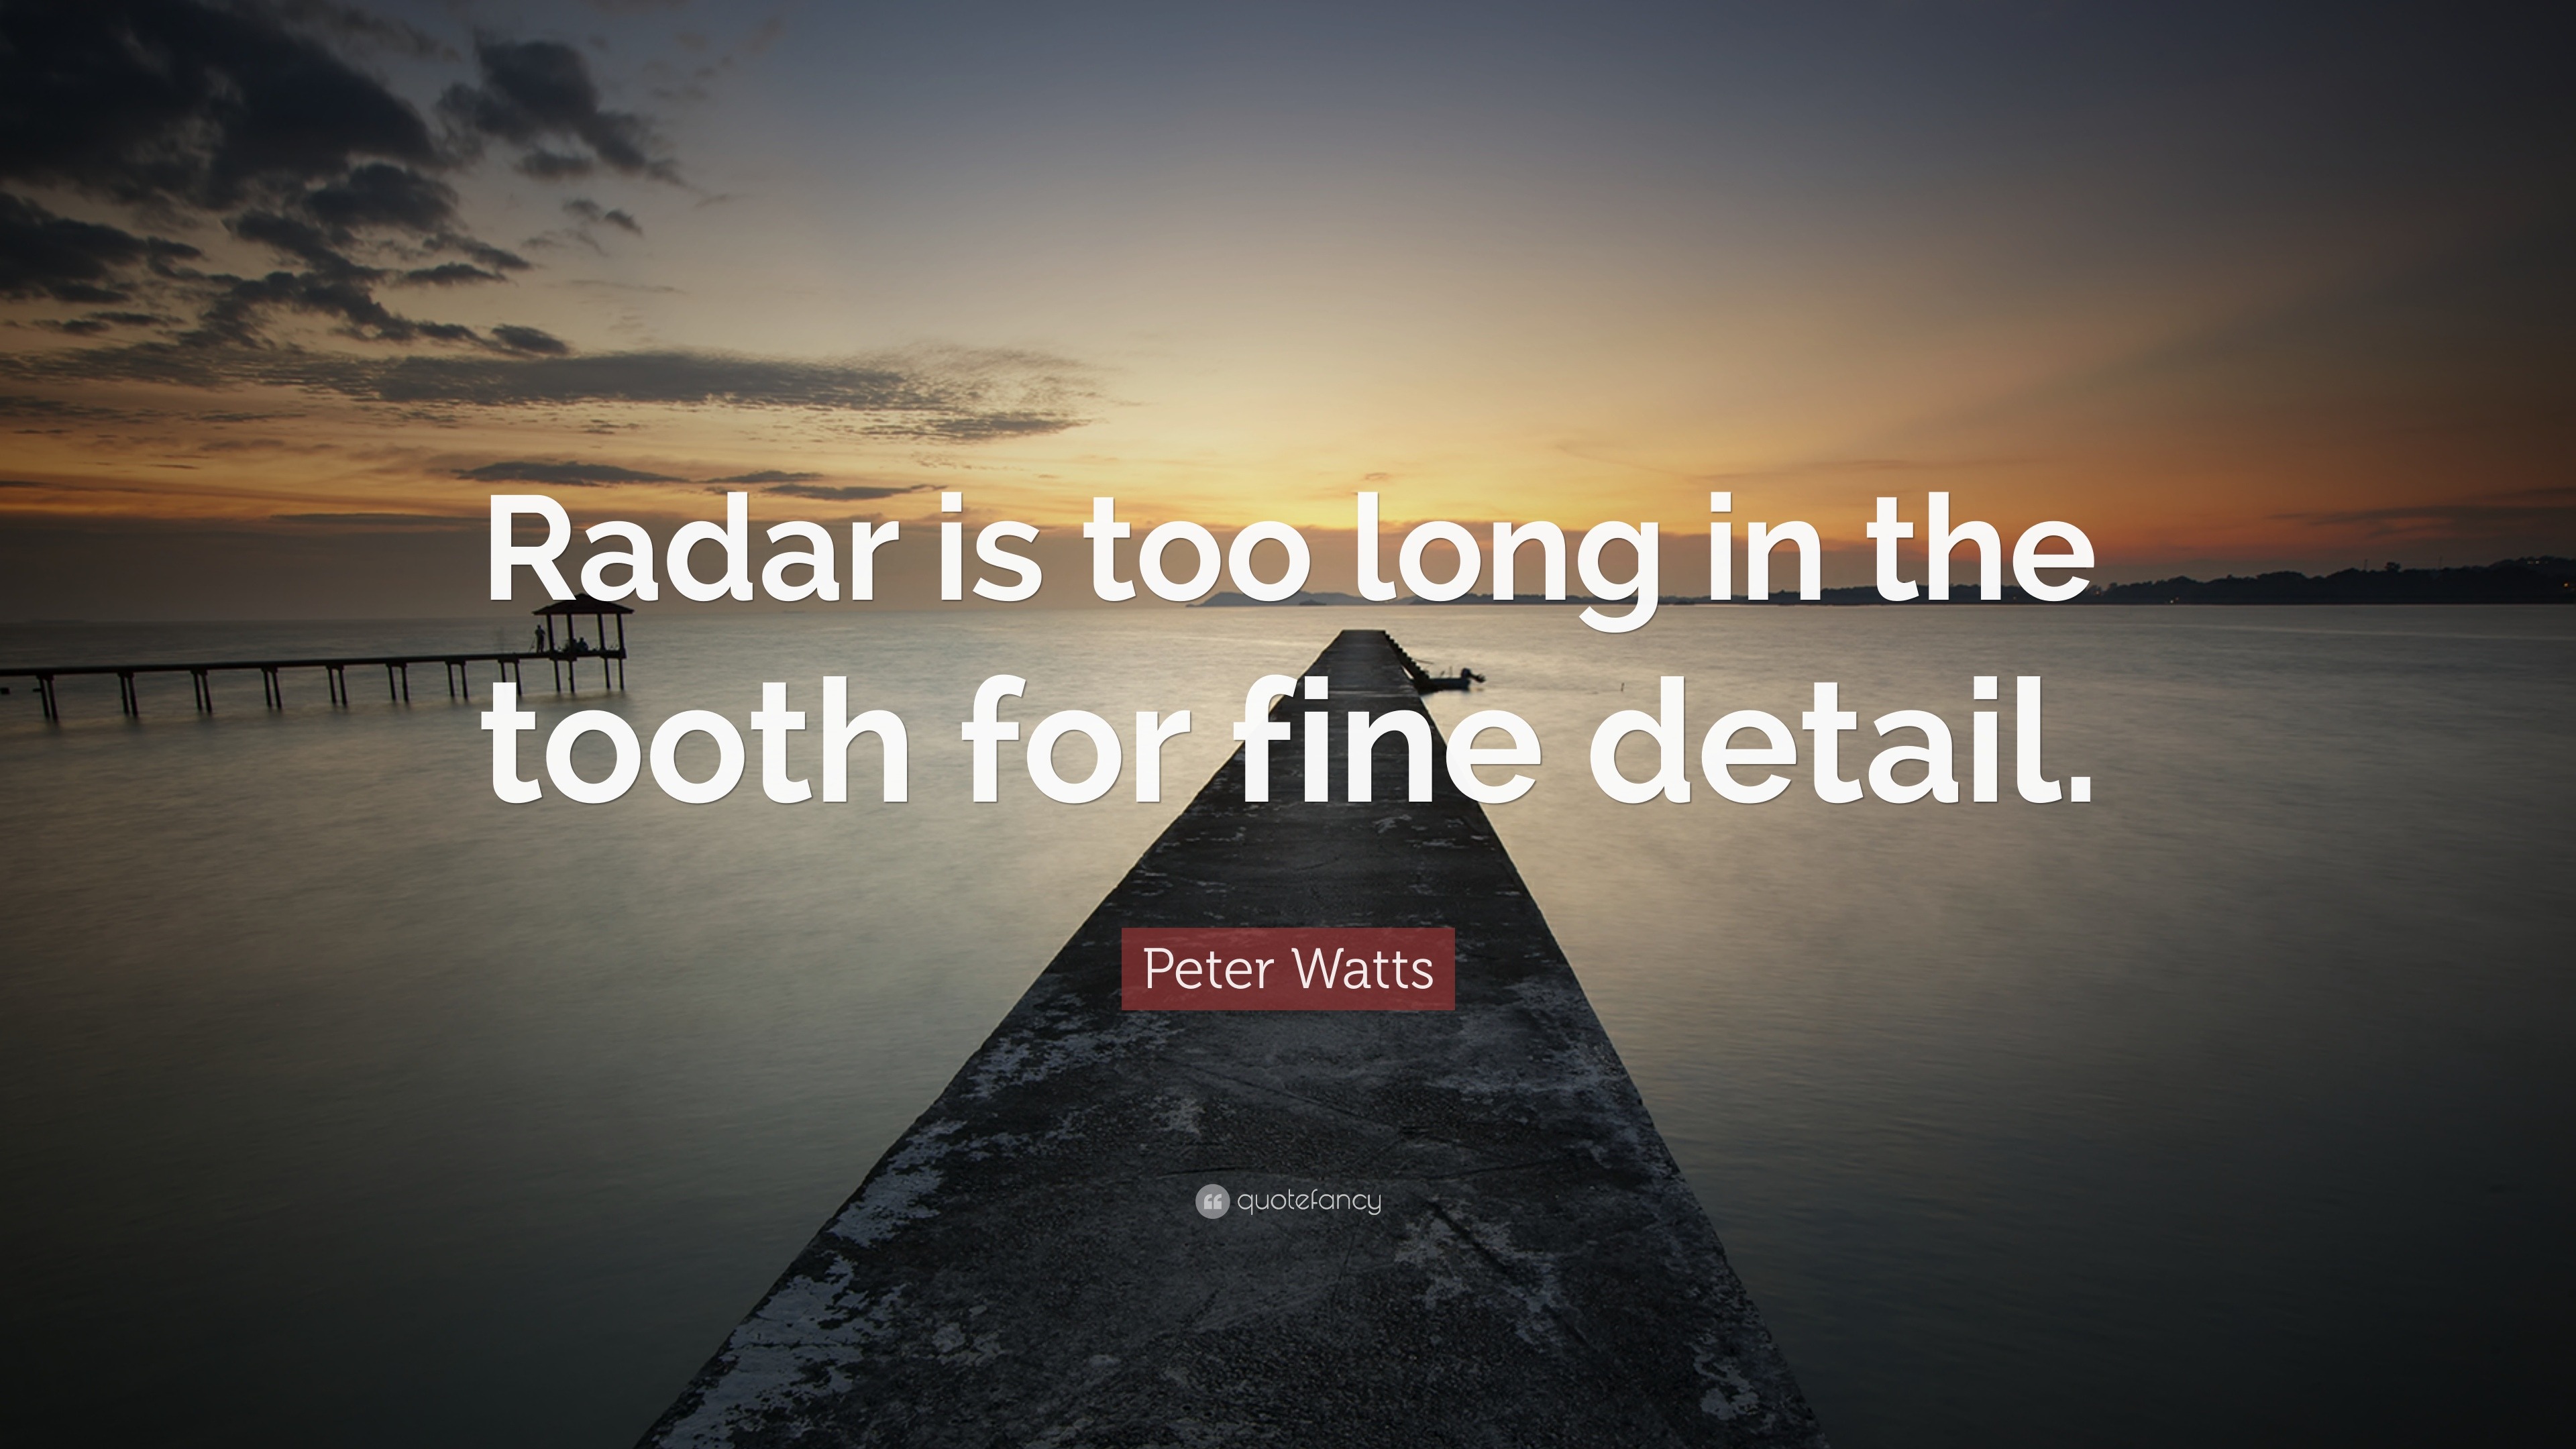 Peter Watts Quote: “Radar is too long in the tooth for fine detail.” (7 wallpapers) - Quotefancy